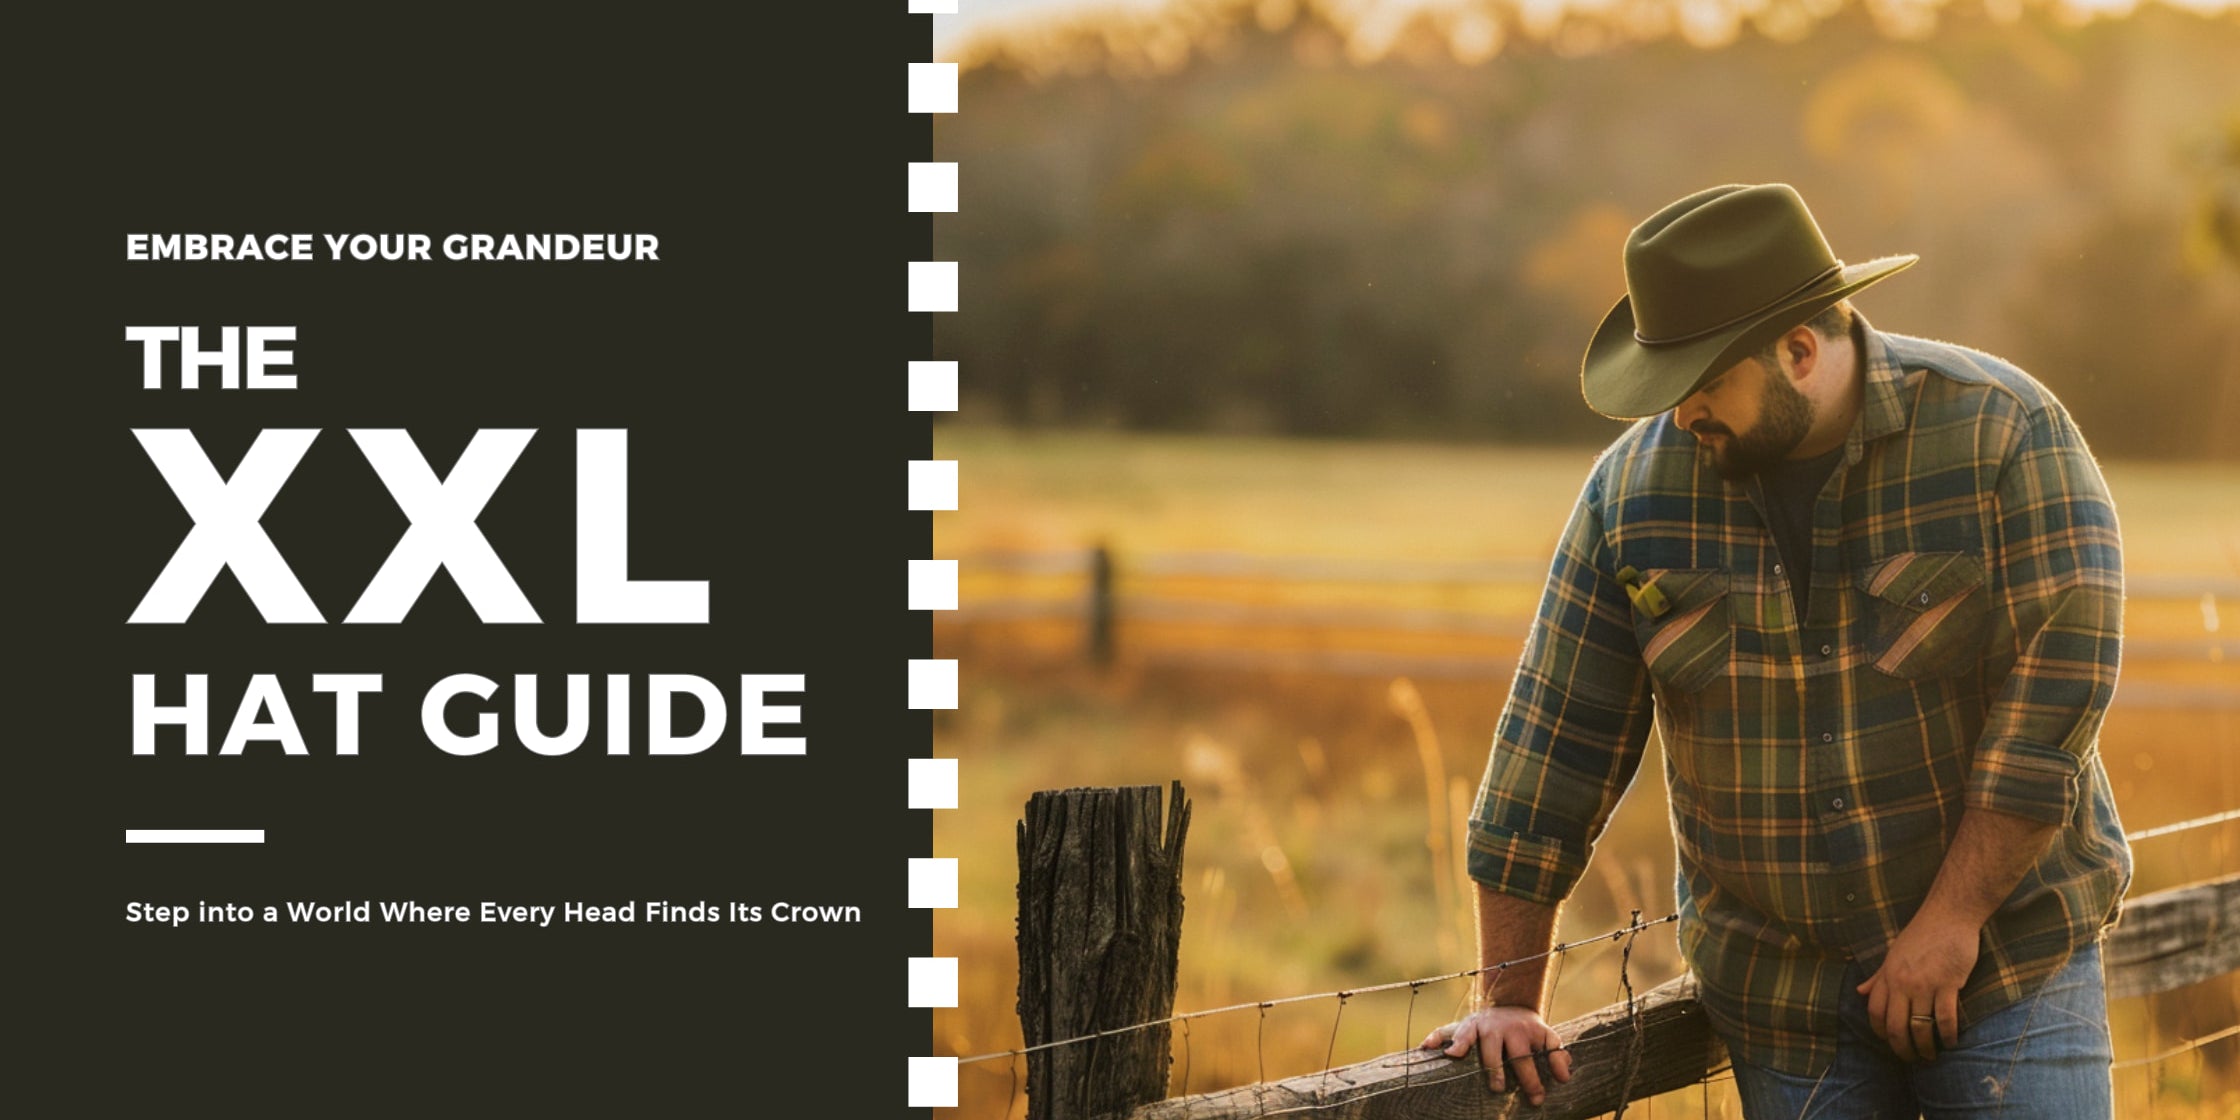 Advertisement for 'The XXL Hat Guide' featuring a man in a plaid shirt and cowboy hat leaning on a wooden fence with a serene rural backdrop, conveying the message of hats for every size.